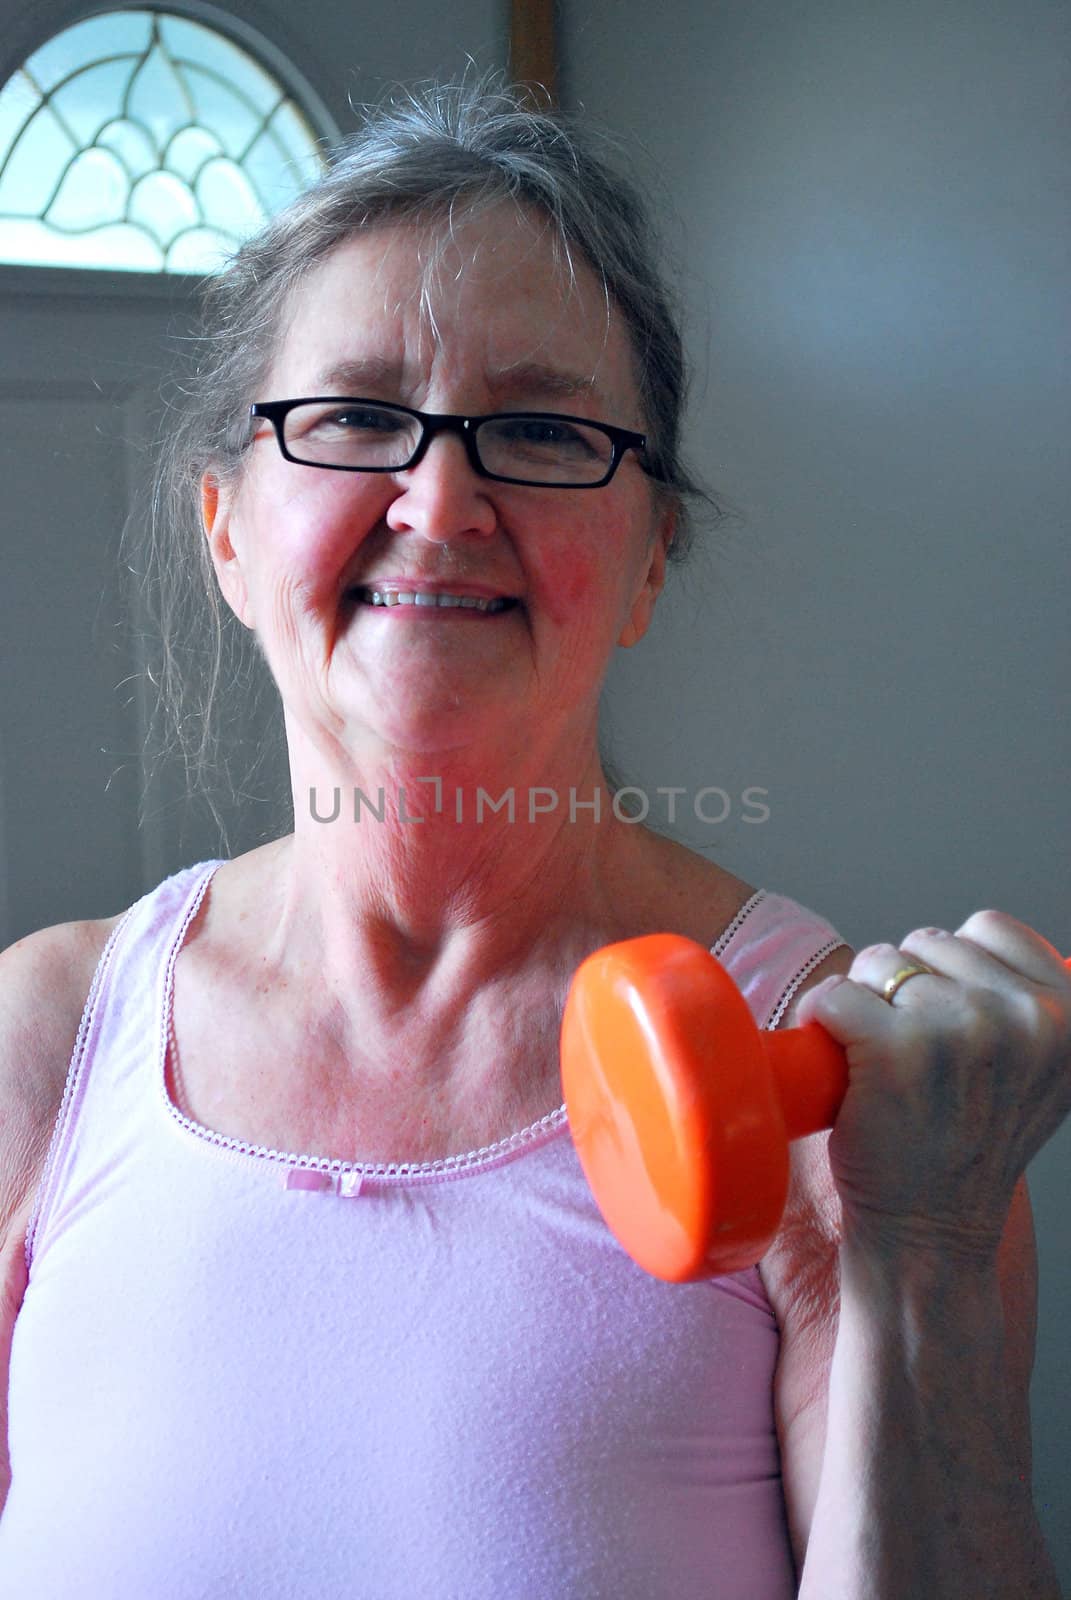 Mature female working out at home.